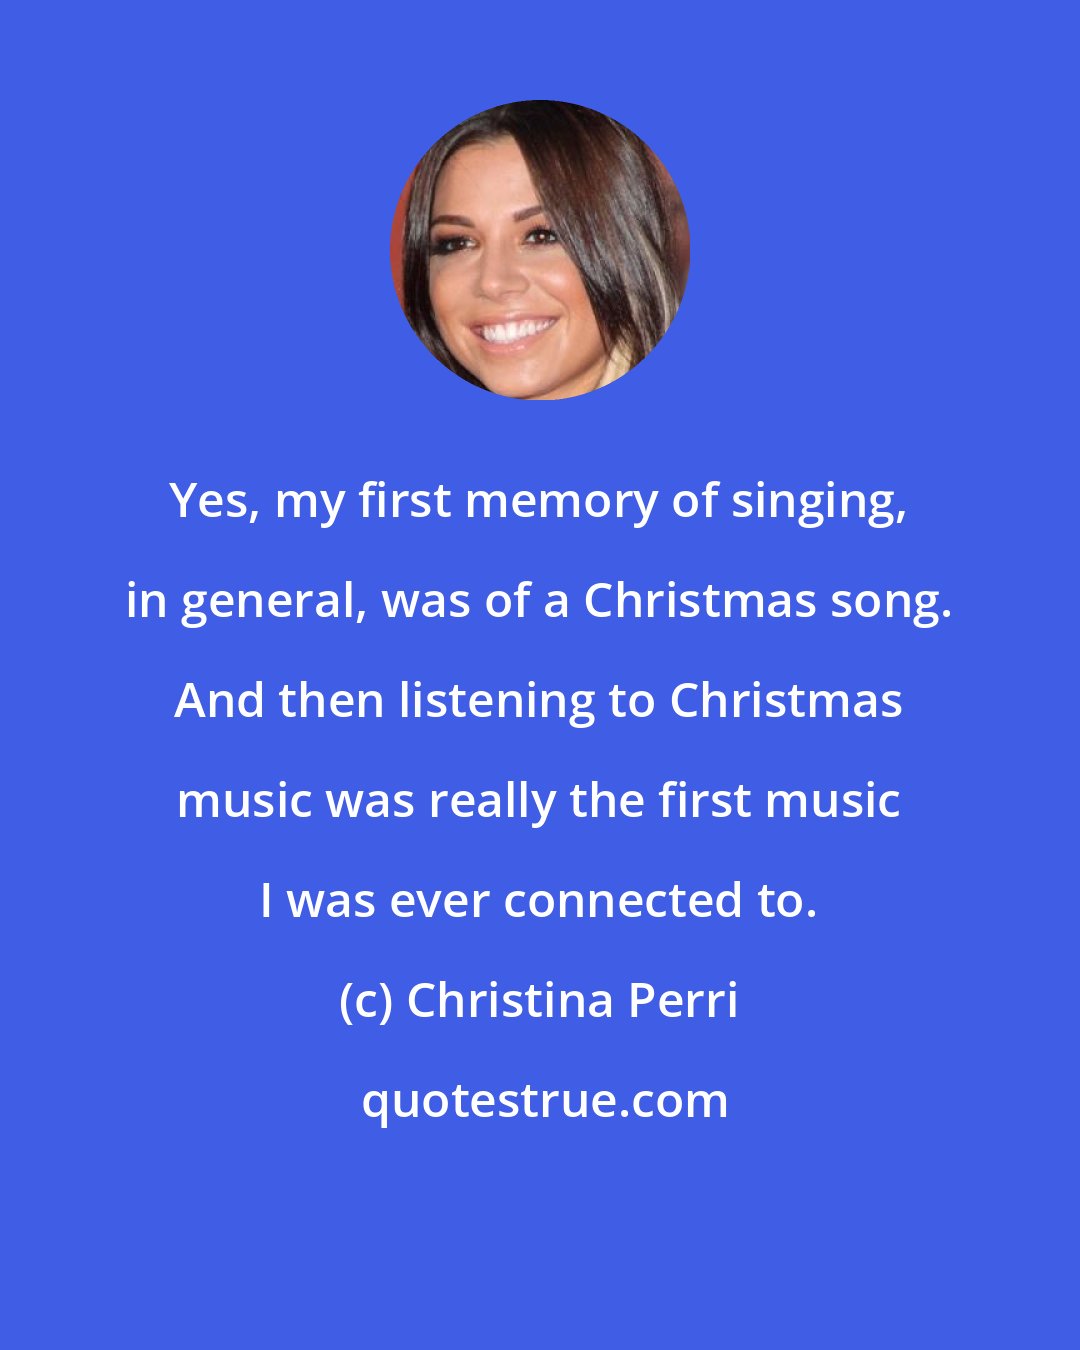 Christina Perri: Yes, my first memory of singing, in general, was of a Christmas song. And then listening to Christmas music was really the first music I was ever connected to.